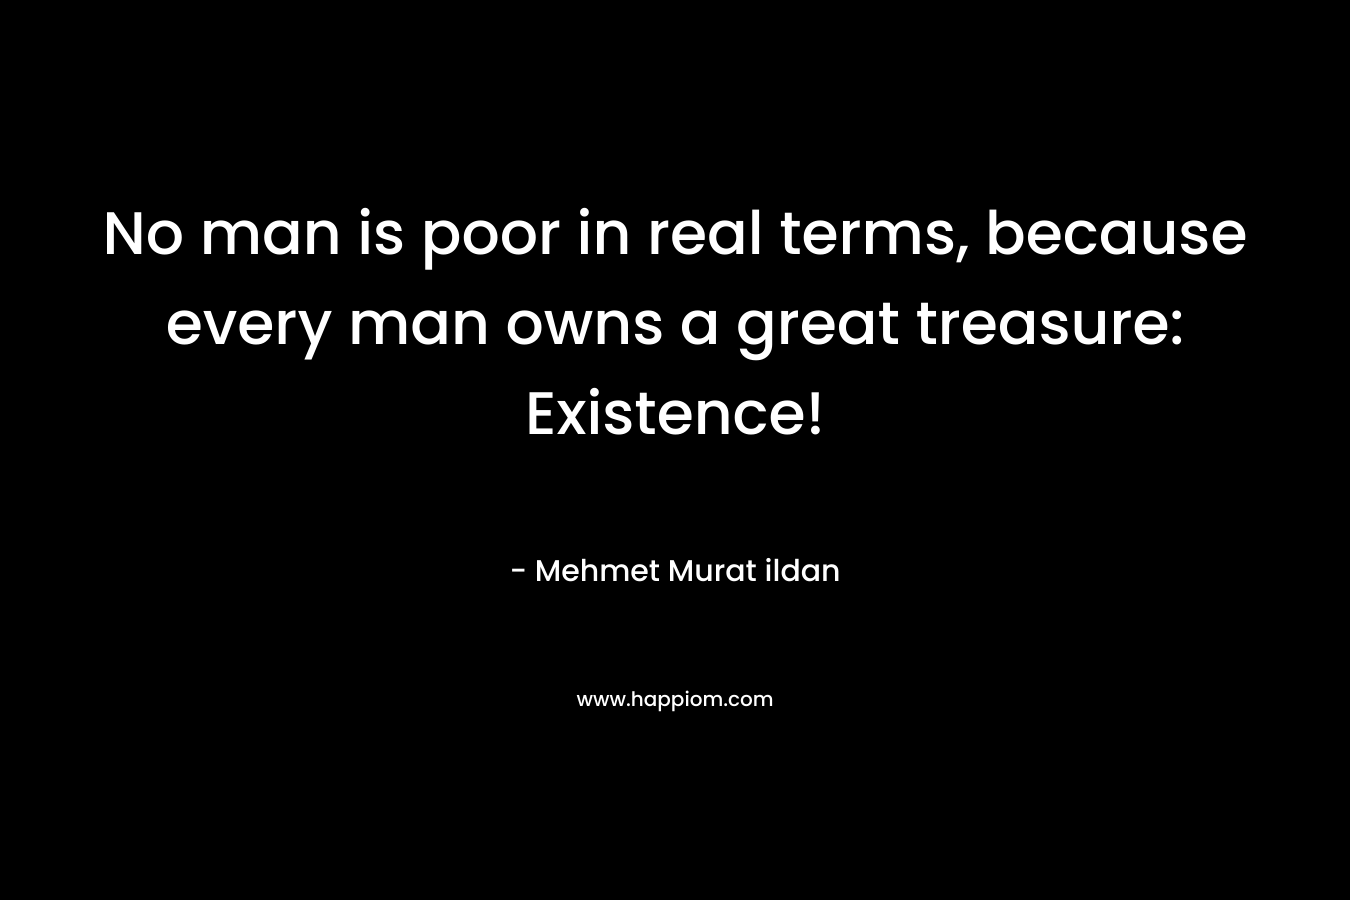 No man is poor in real terms, because every man owns a great treasure: Existence! – Mehmet Murat ildan